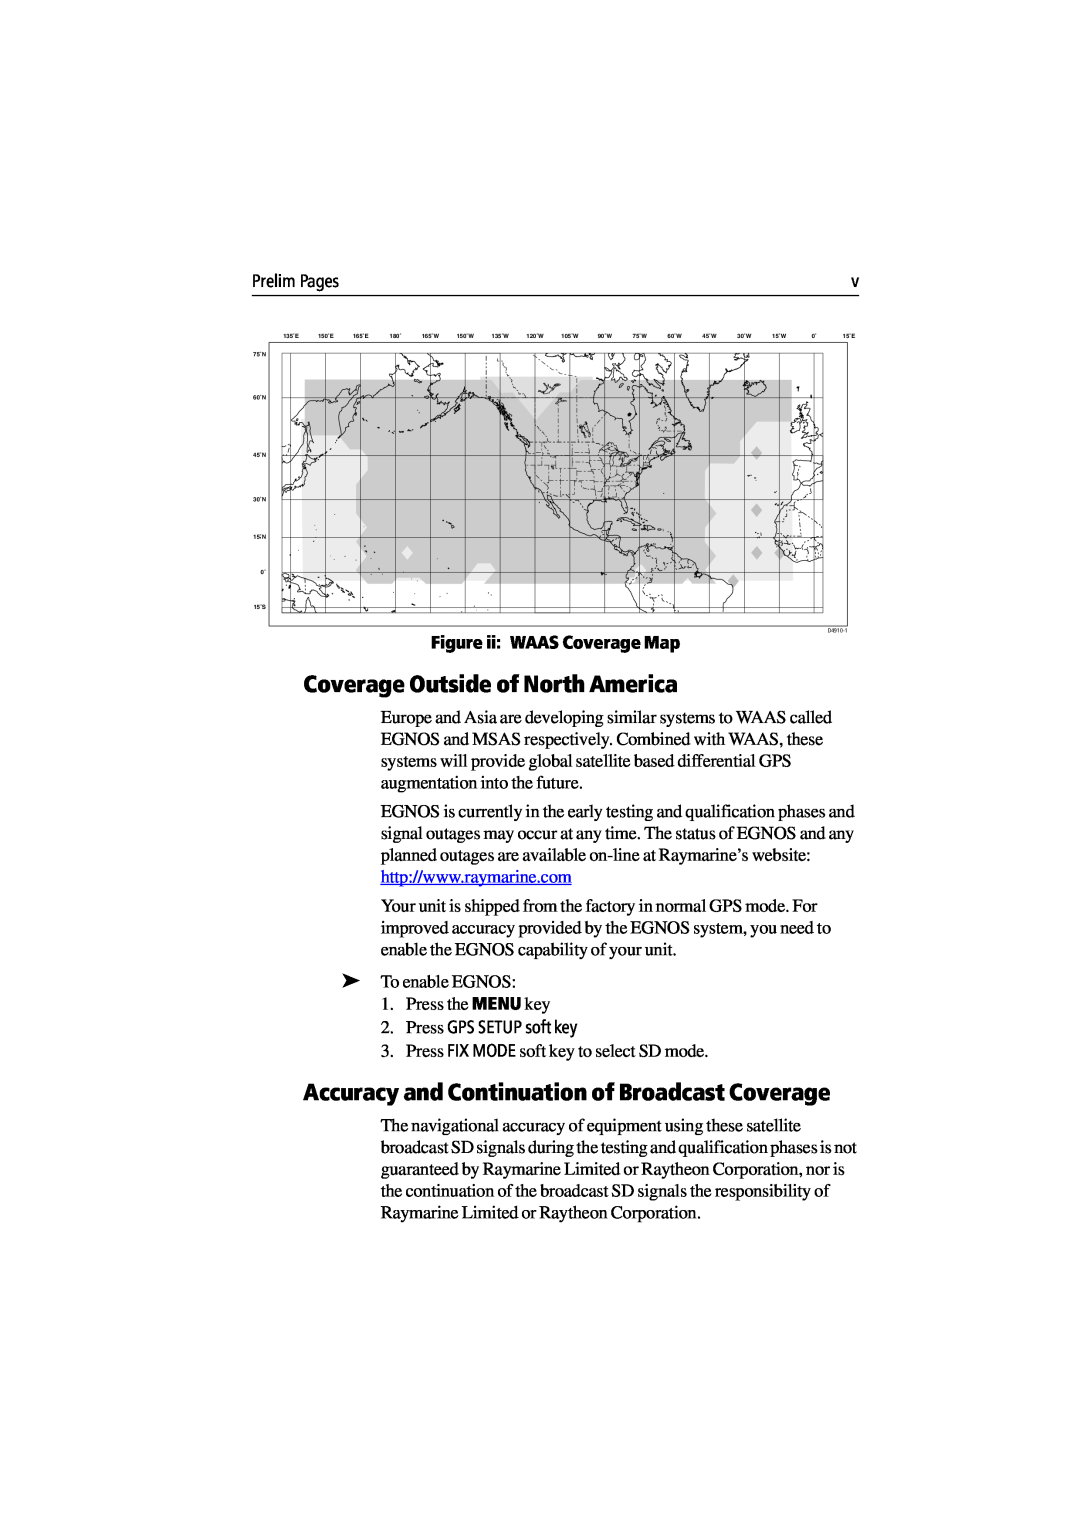 Raymarine 300 manual Coverage Outside of North America, Accuracy and Continuation of Broadcast Coverage 